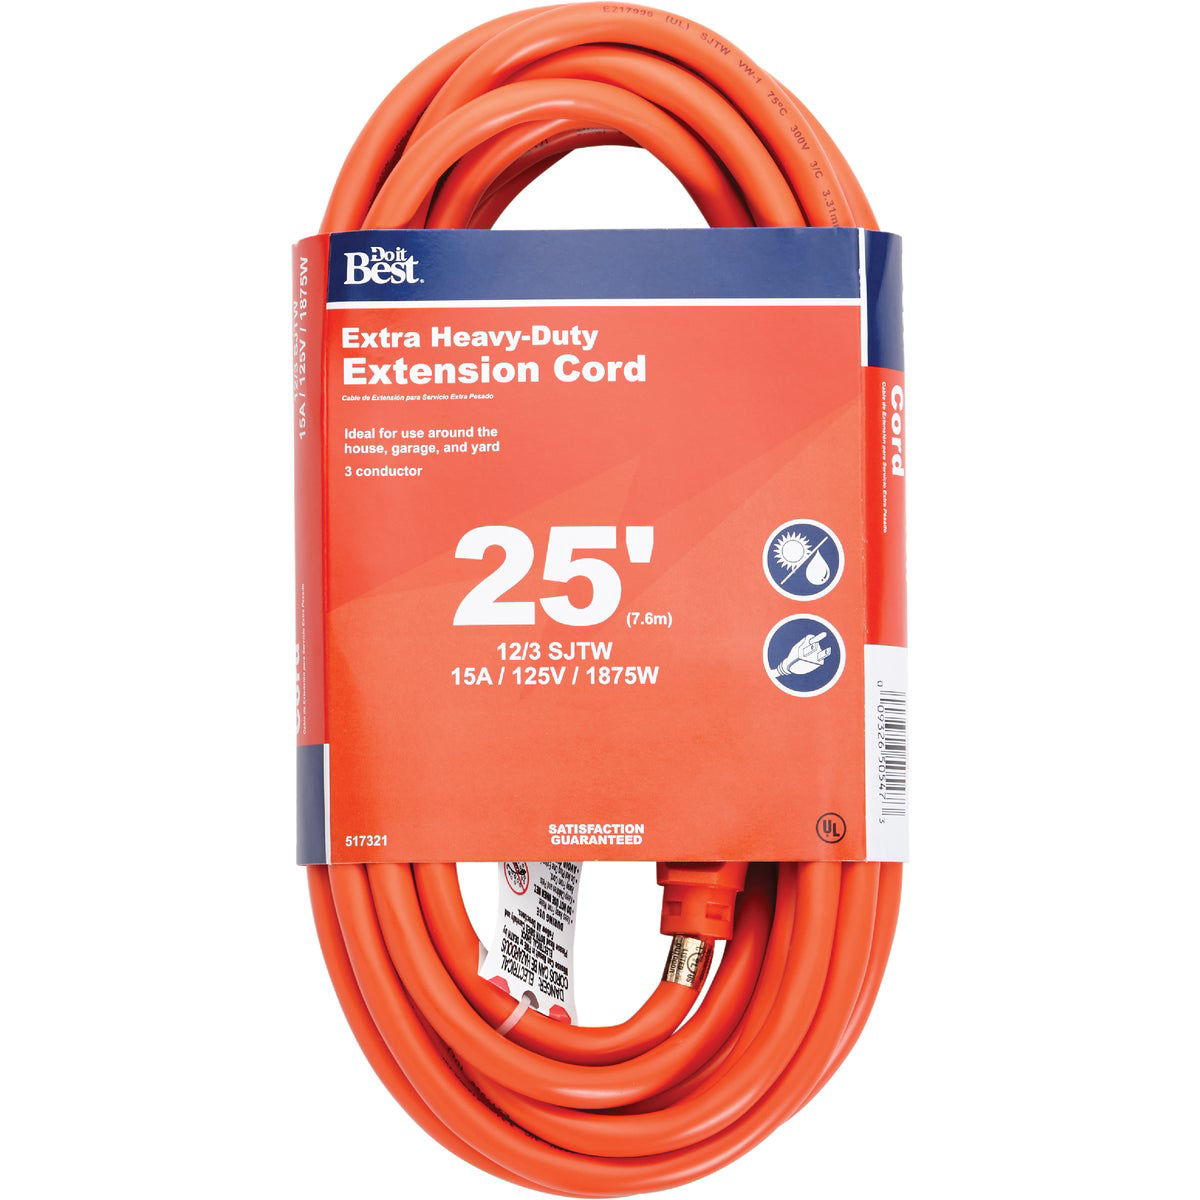 Extension Cords & Cables  Indoor & Outdoor Cords, Reels, Booster